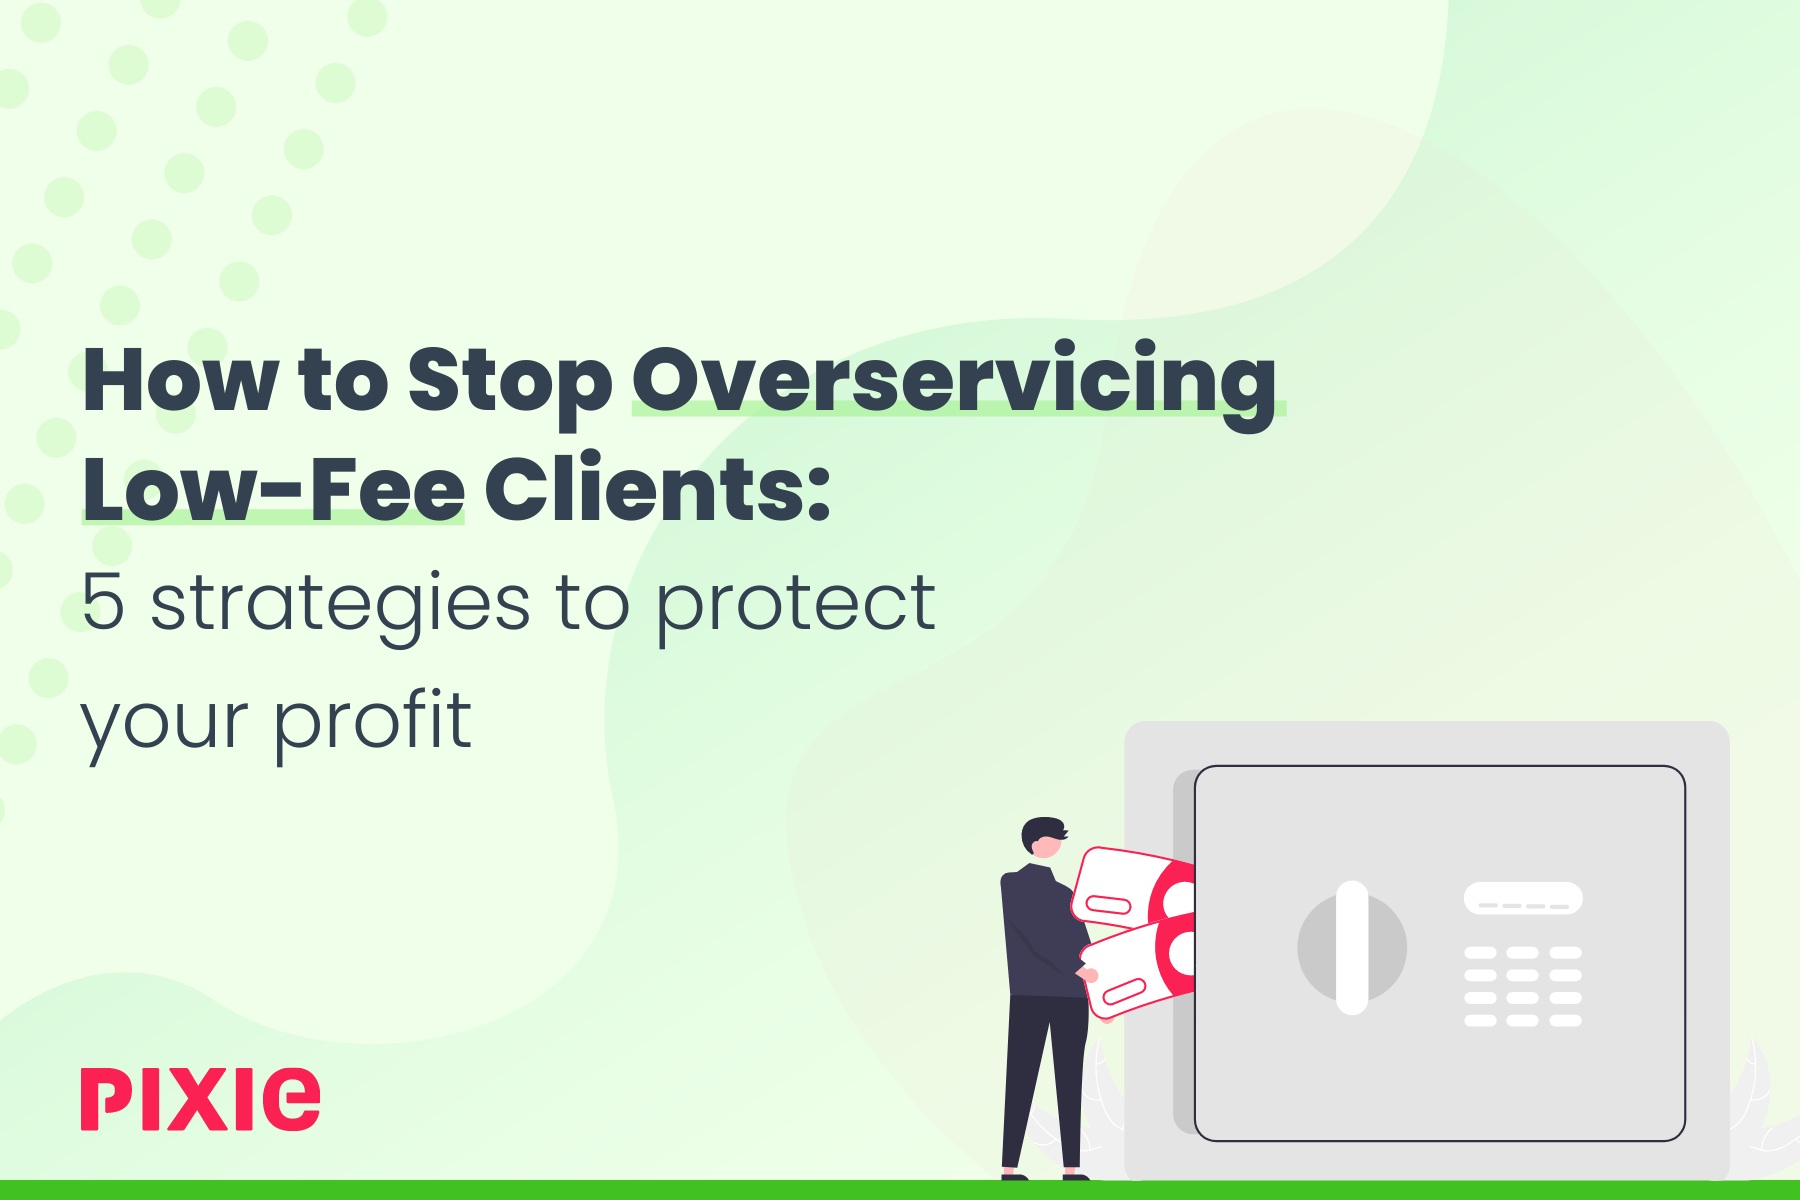 How to Stop Overservicing Low-Fee Clients